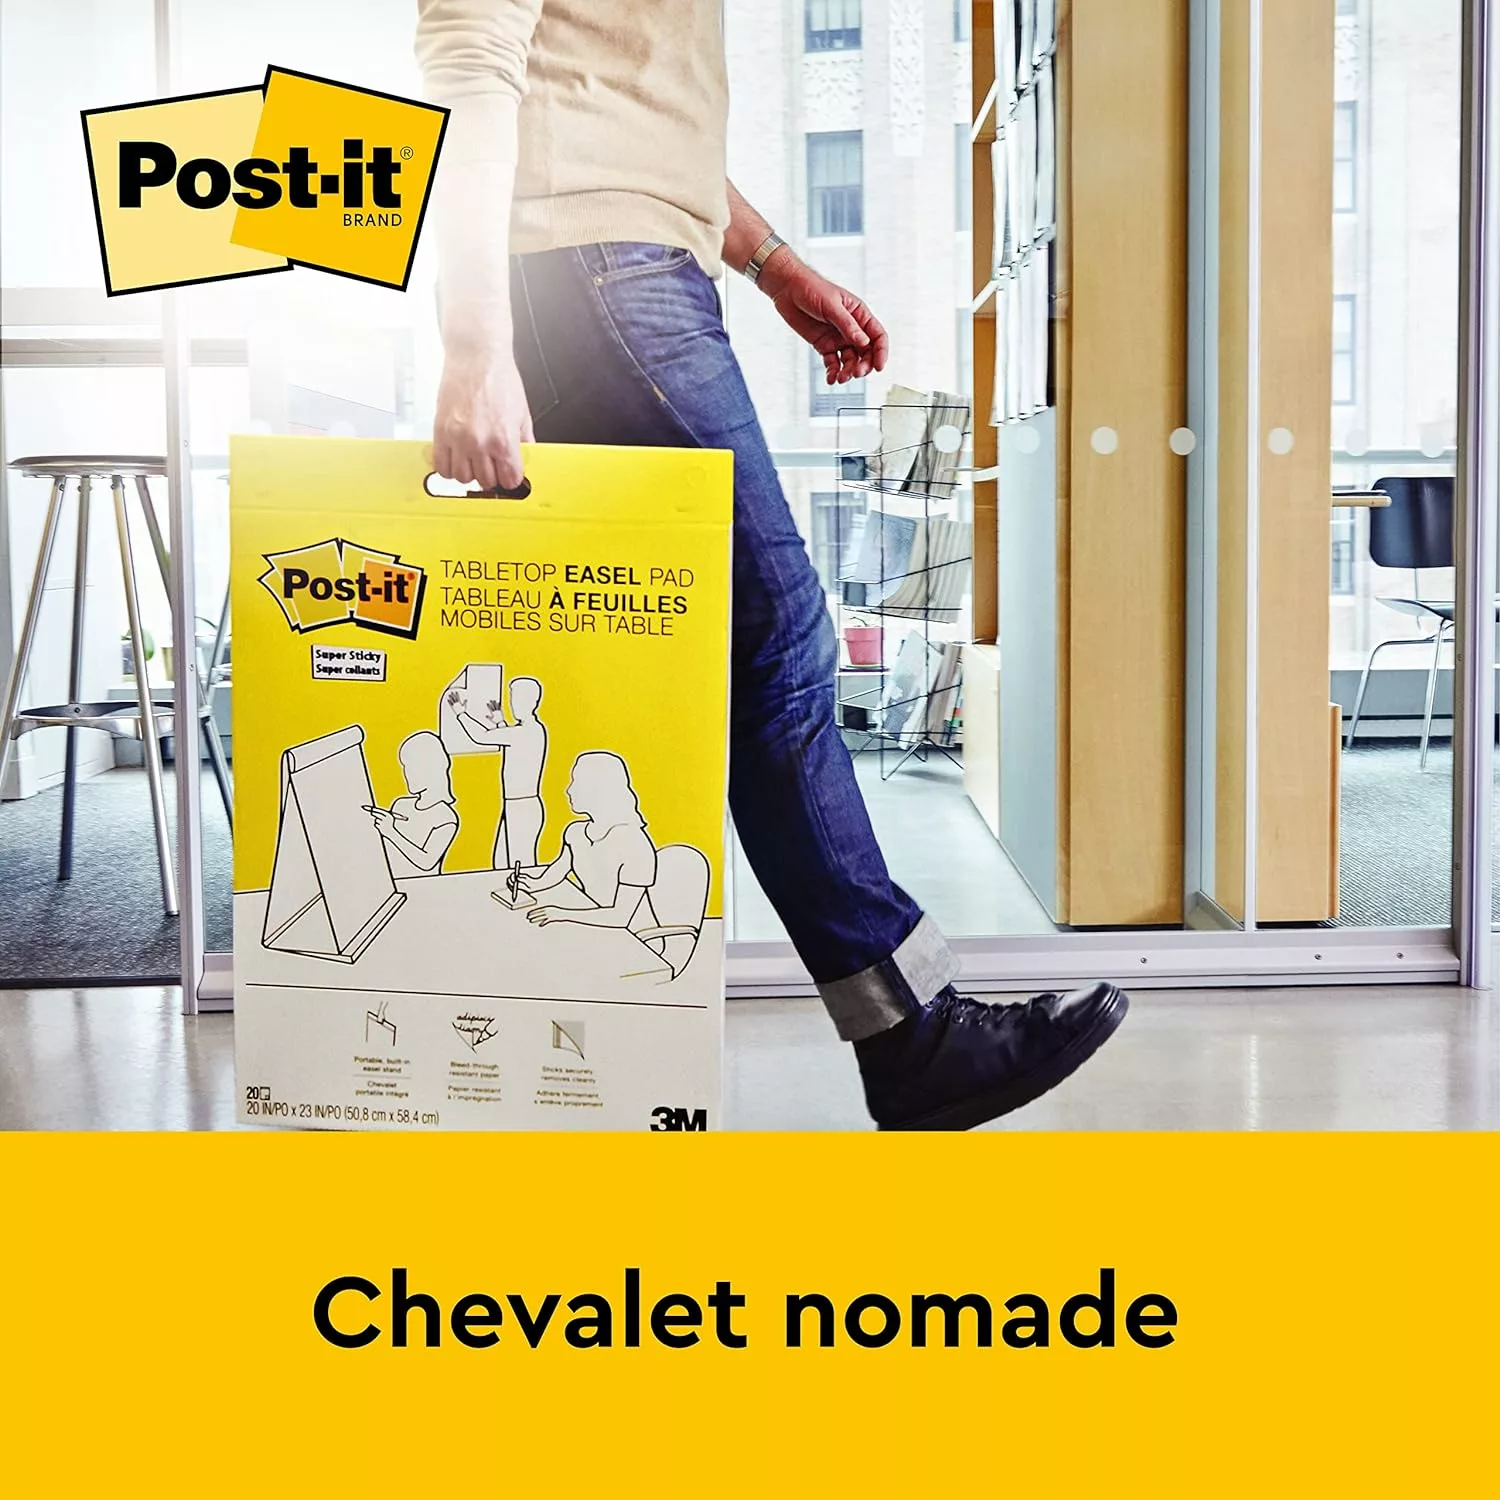 Le Paperboard Post-it chevalet